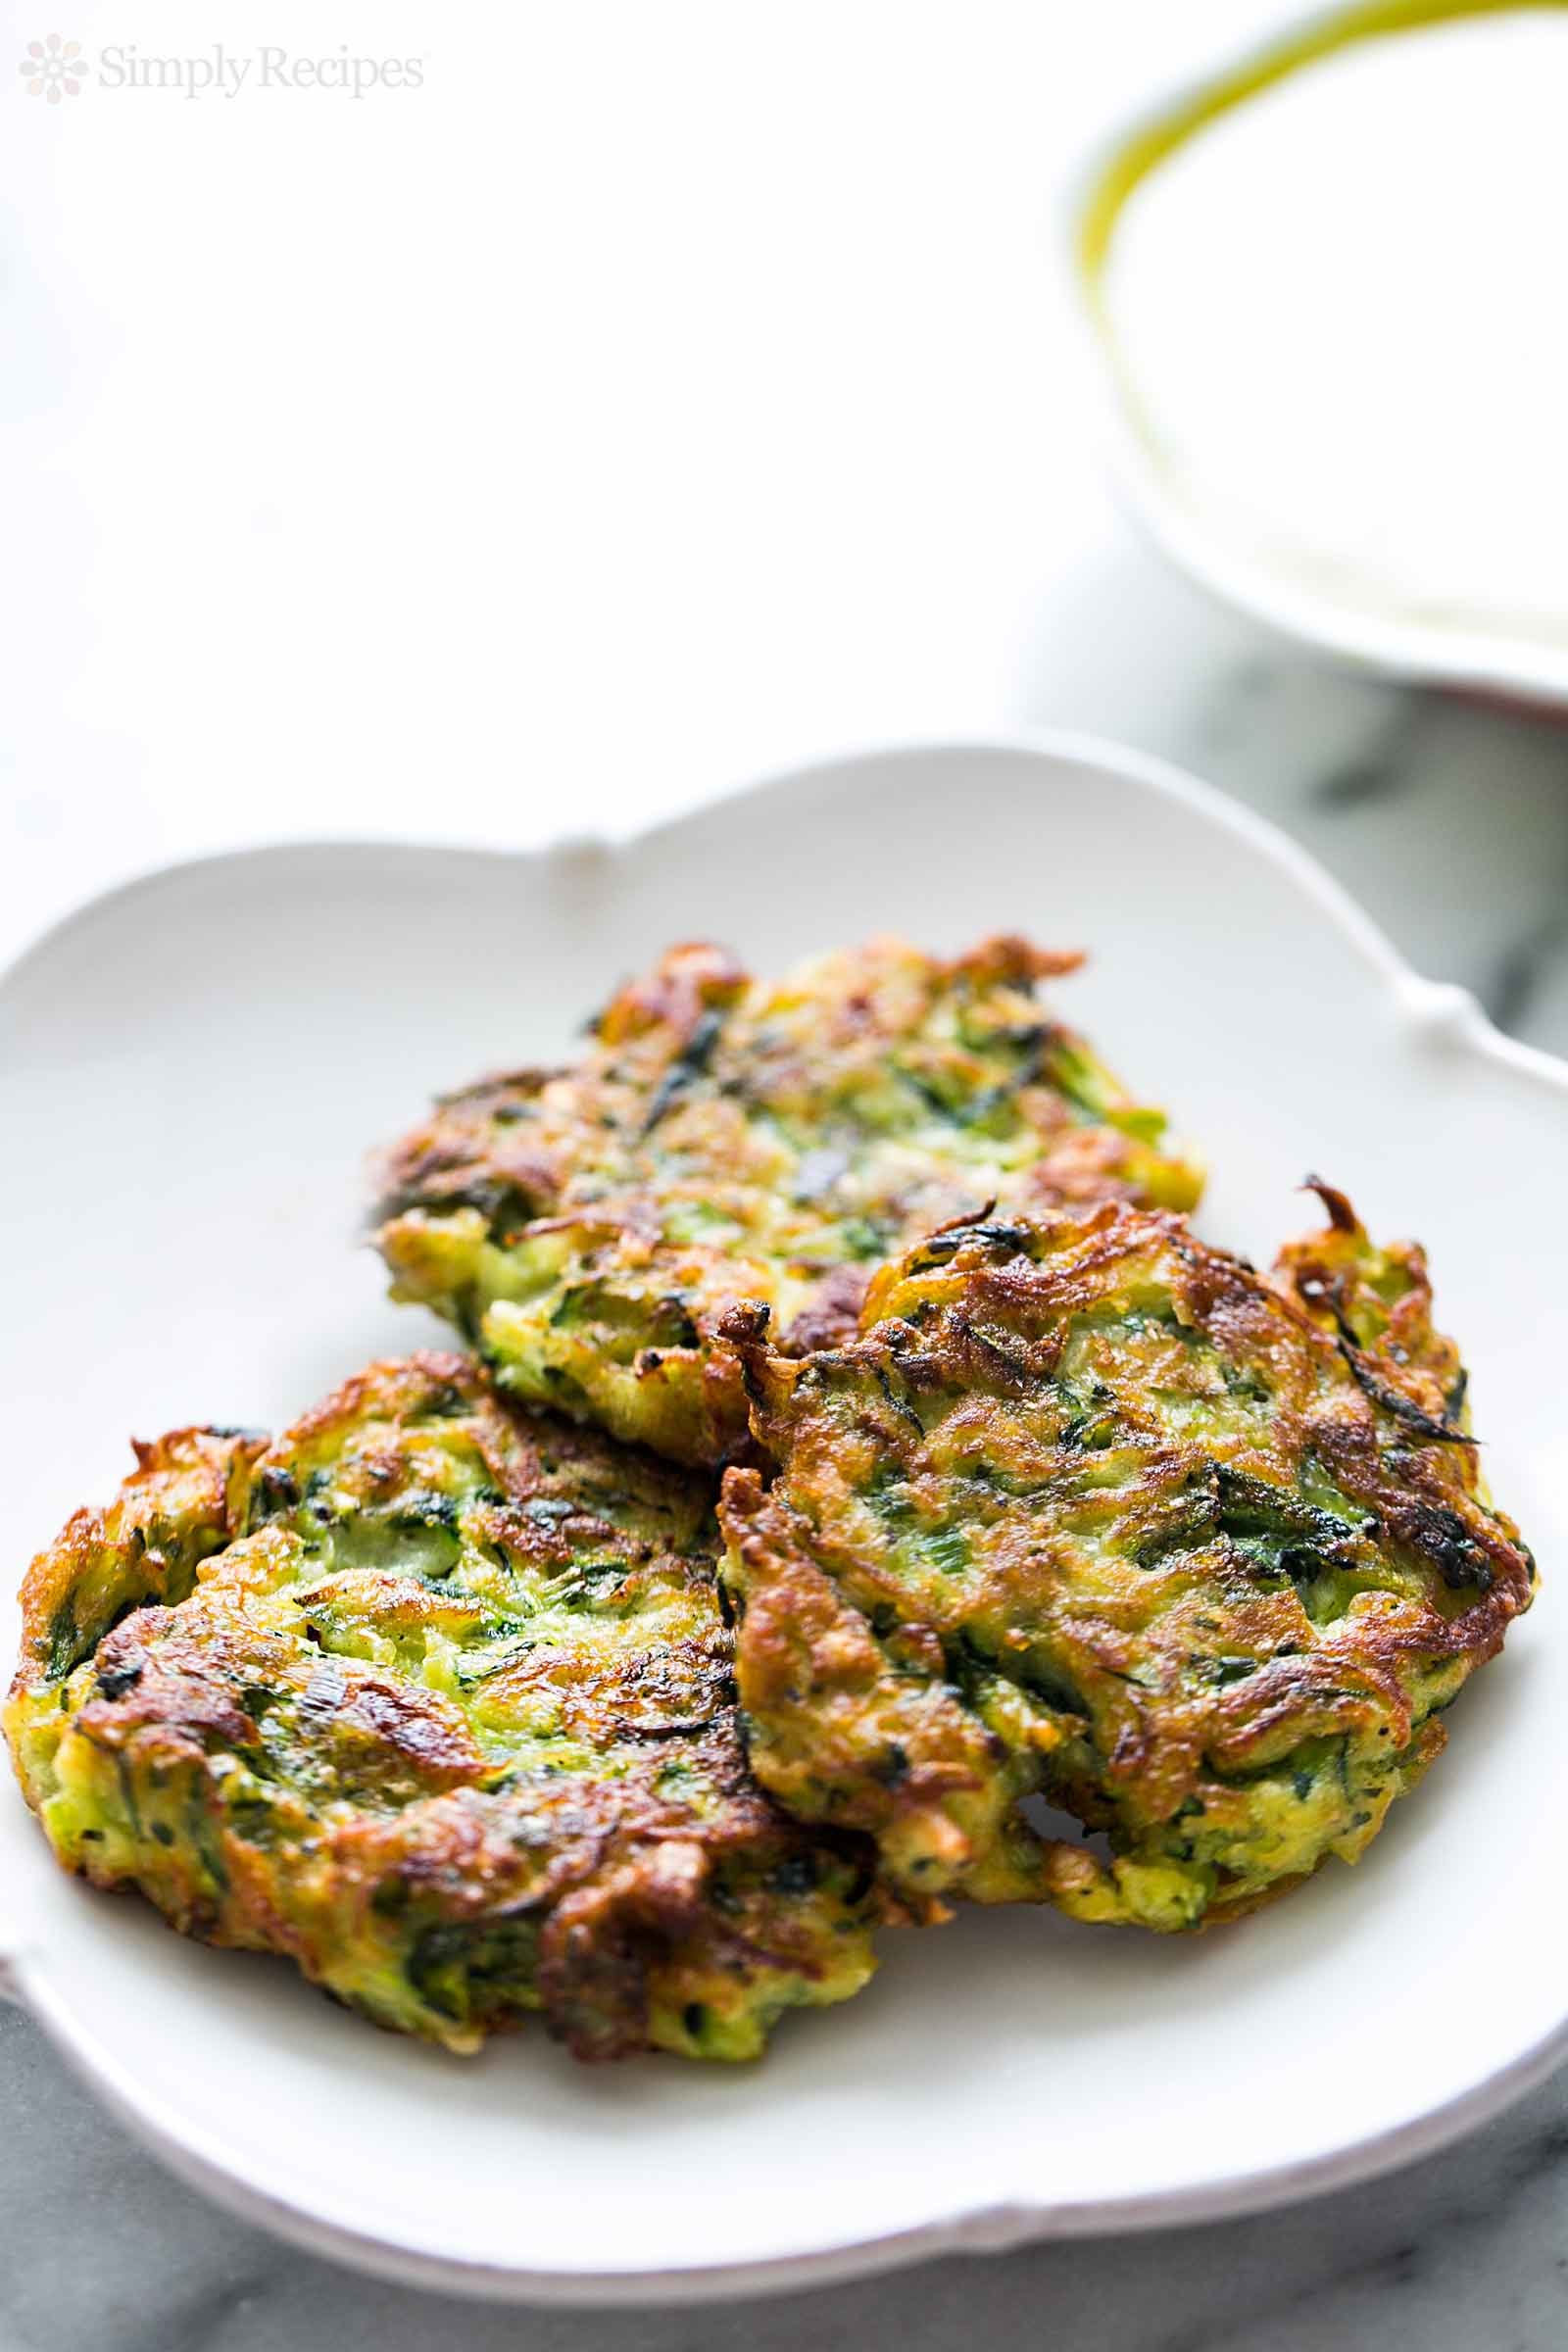 Zucchini Fritters from Simply Recipes